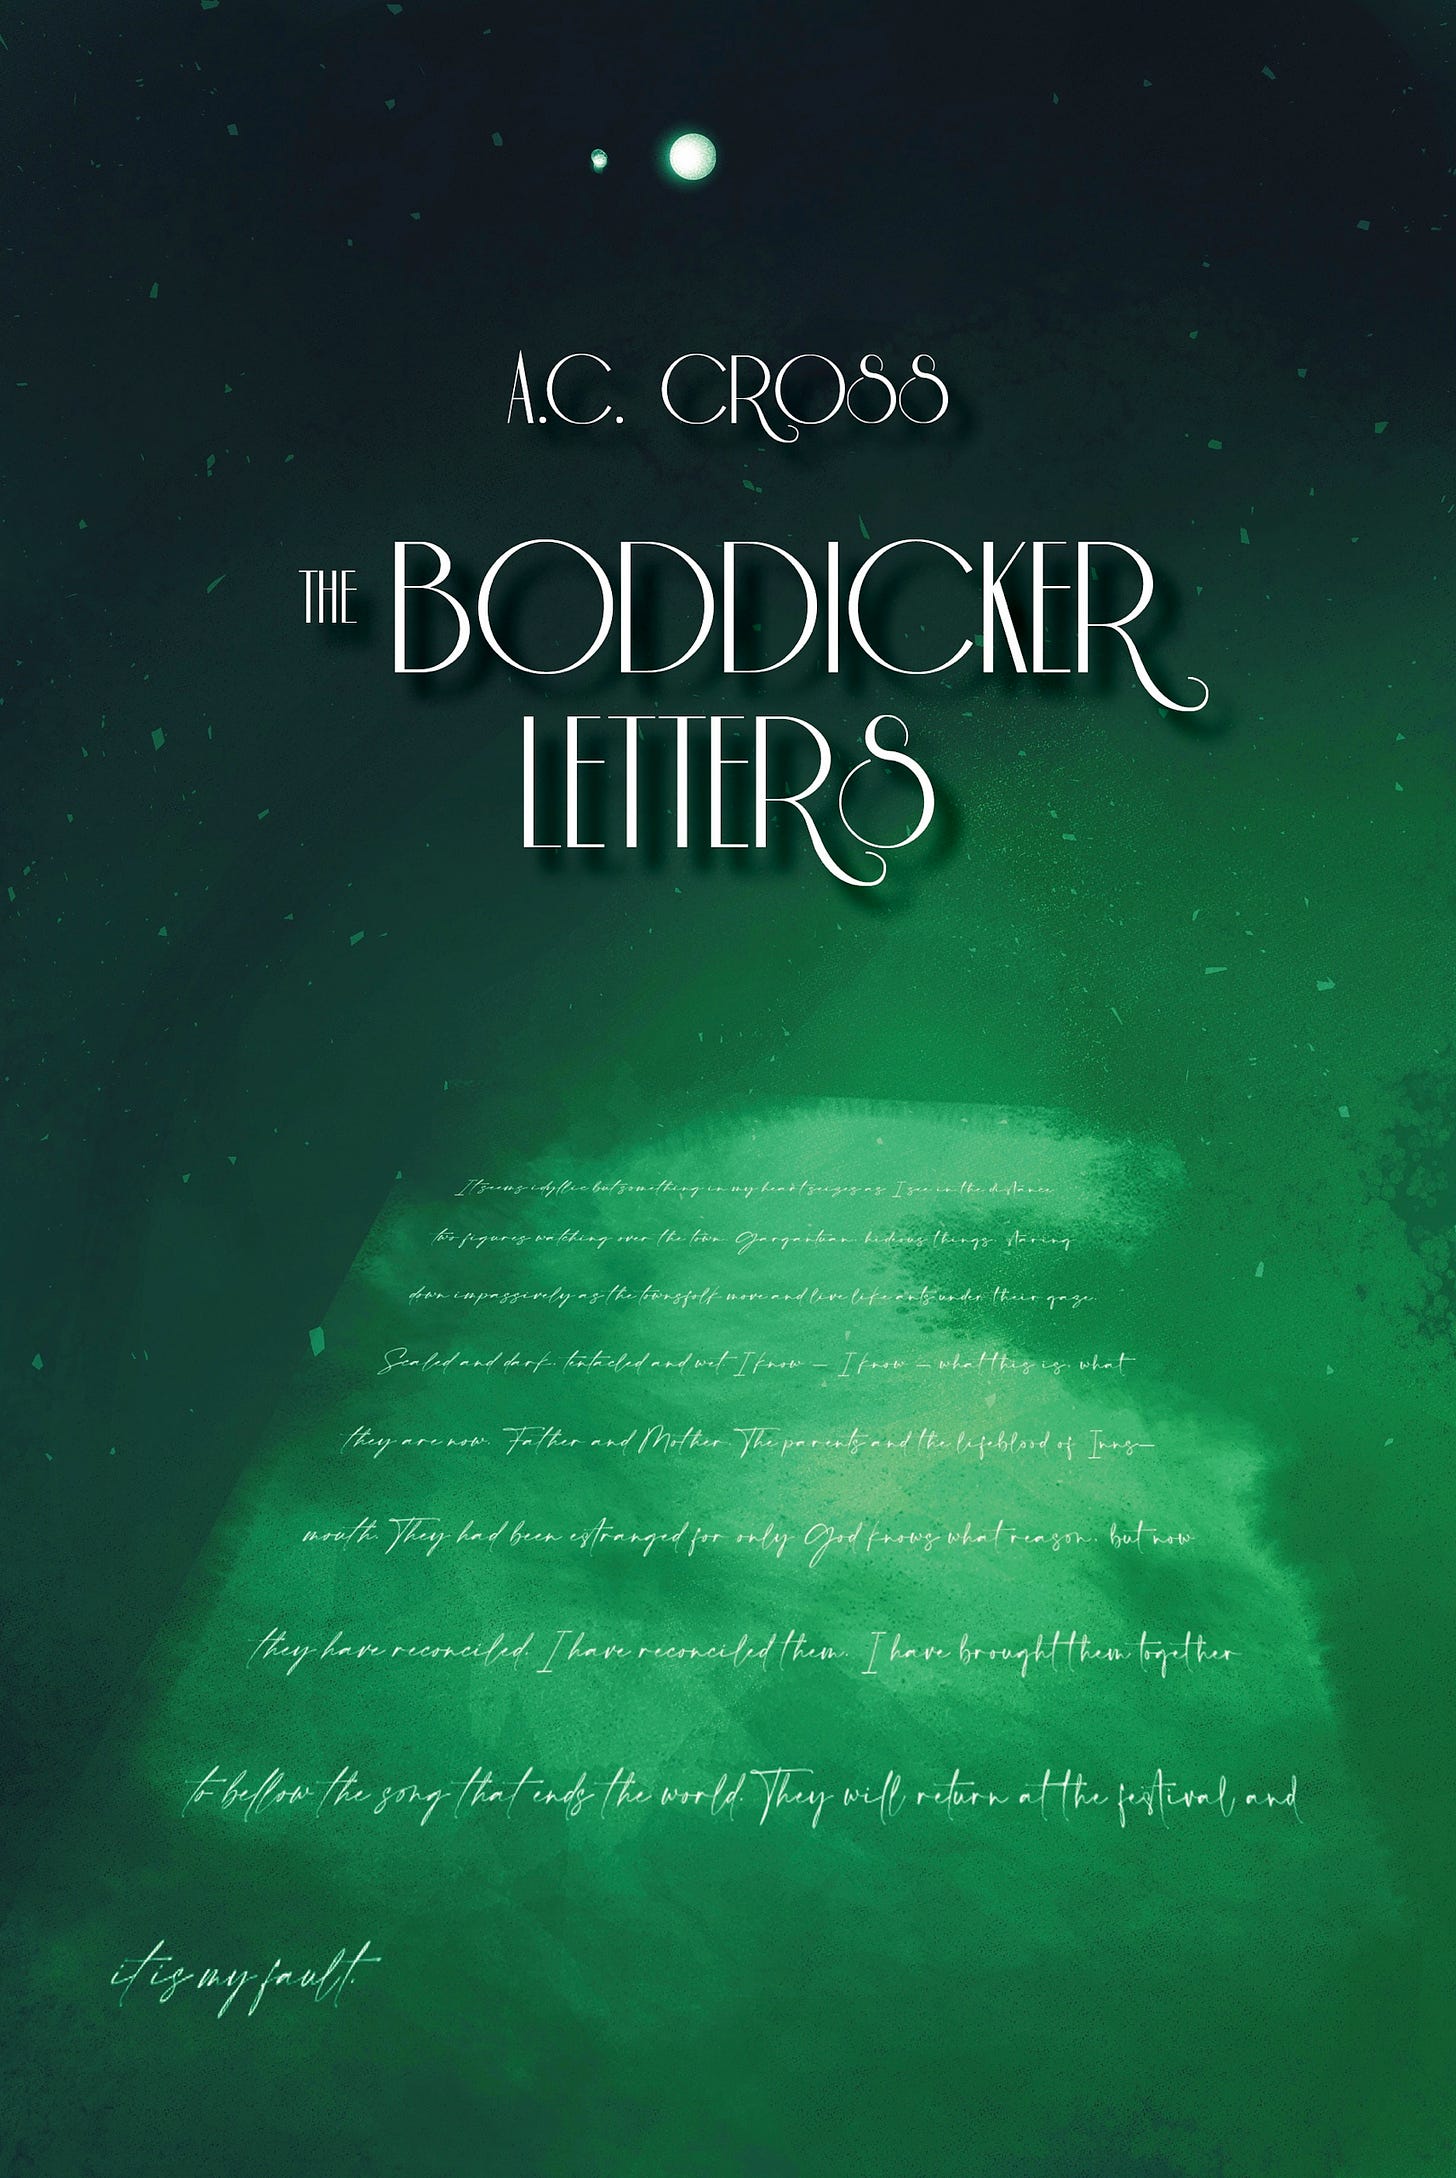 Cover of The Boddicker Letters by A.C. Cross